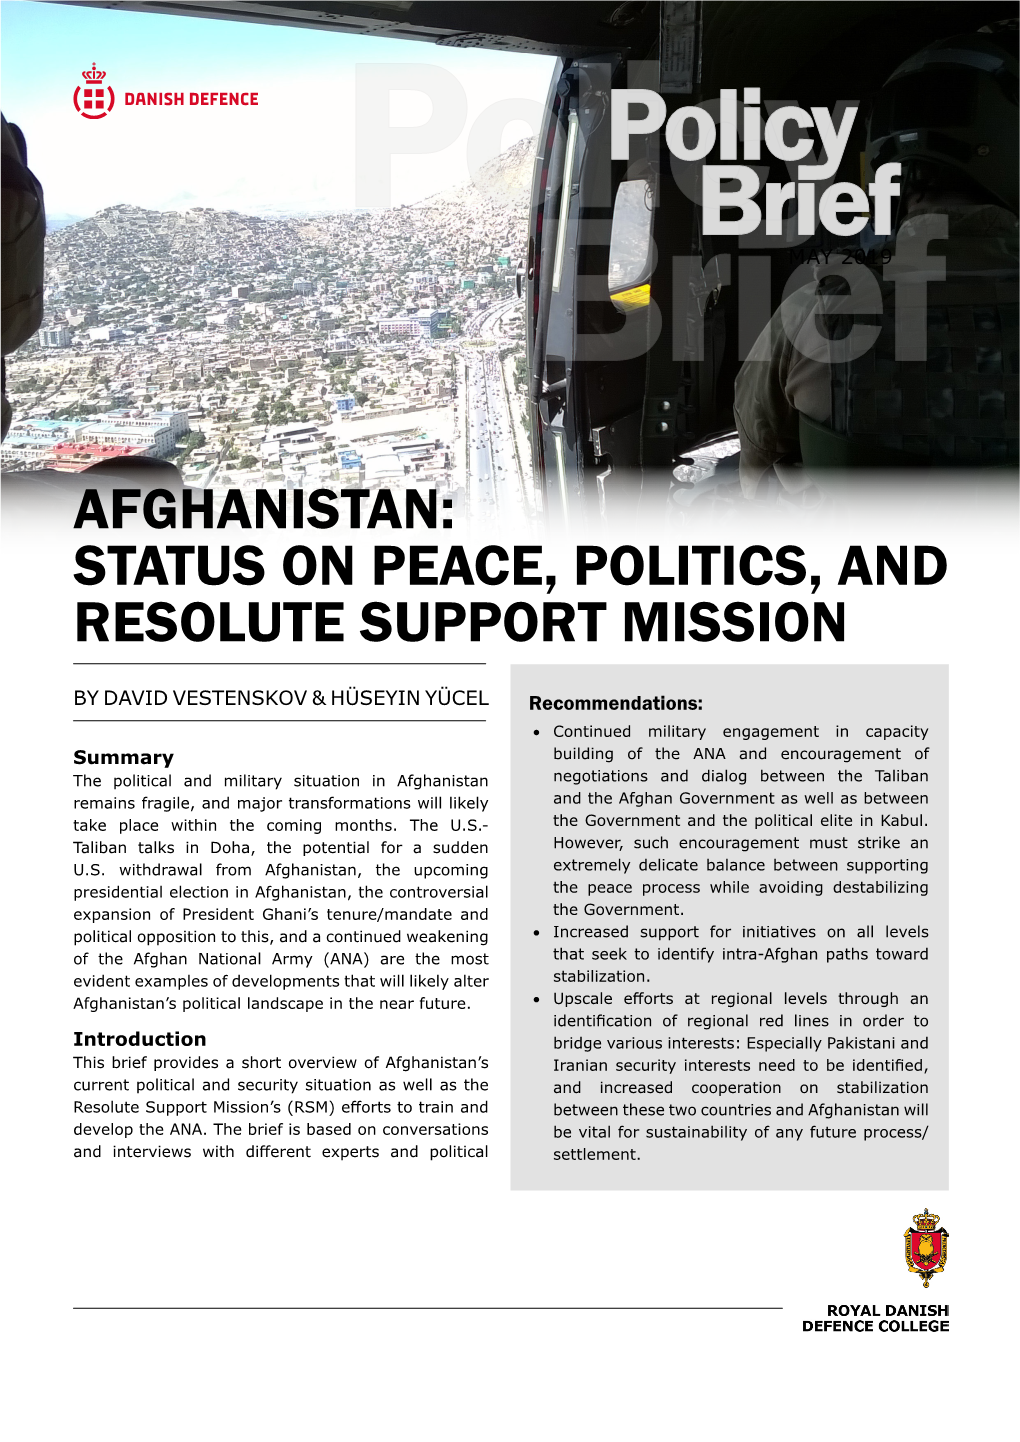 Afghanistan: Status on Peace, Politics, and Resolute Support Mission